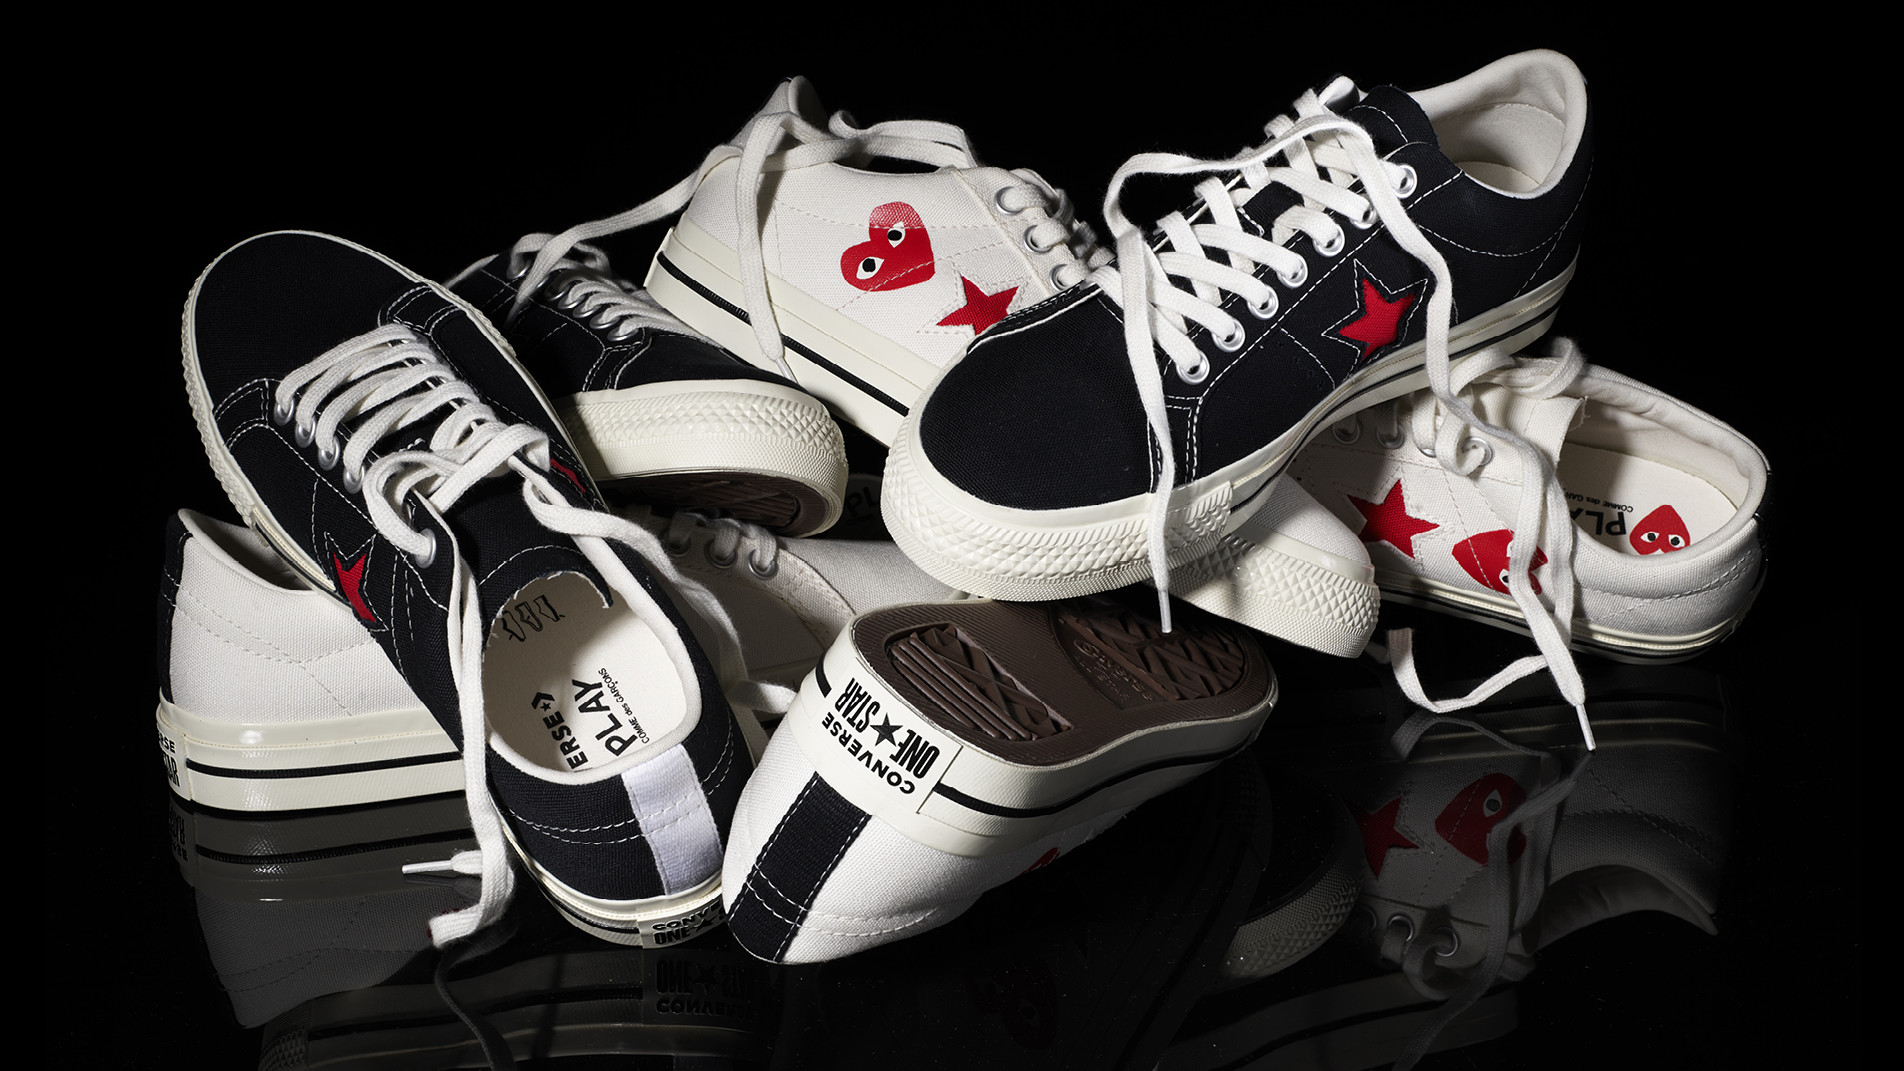 Comme des Garçons and Collab on a New Sneaker |